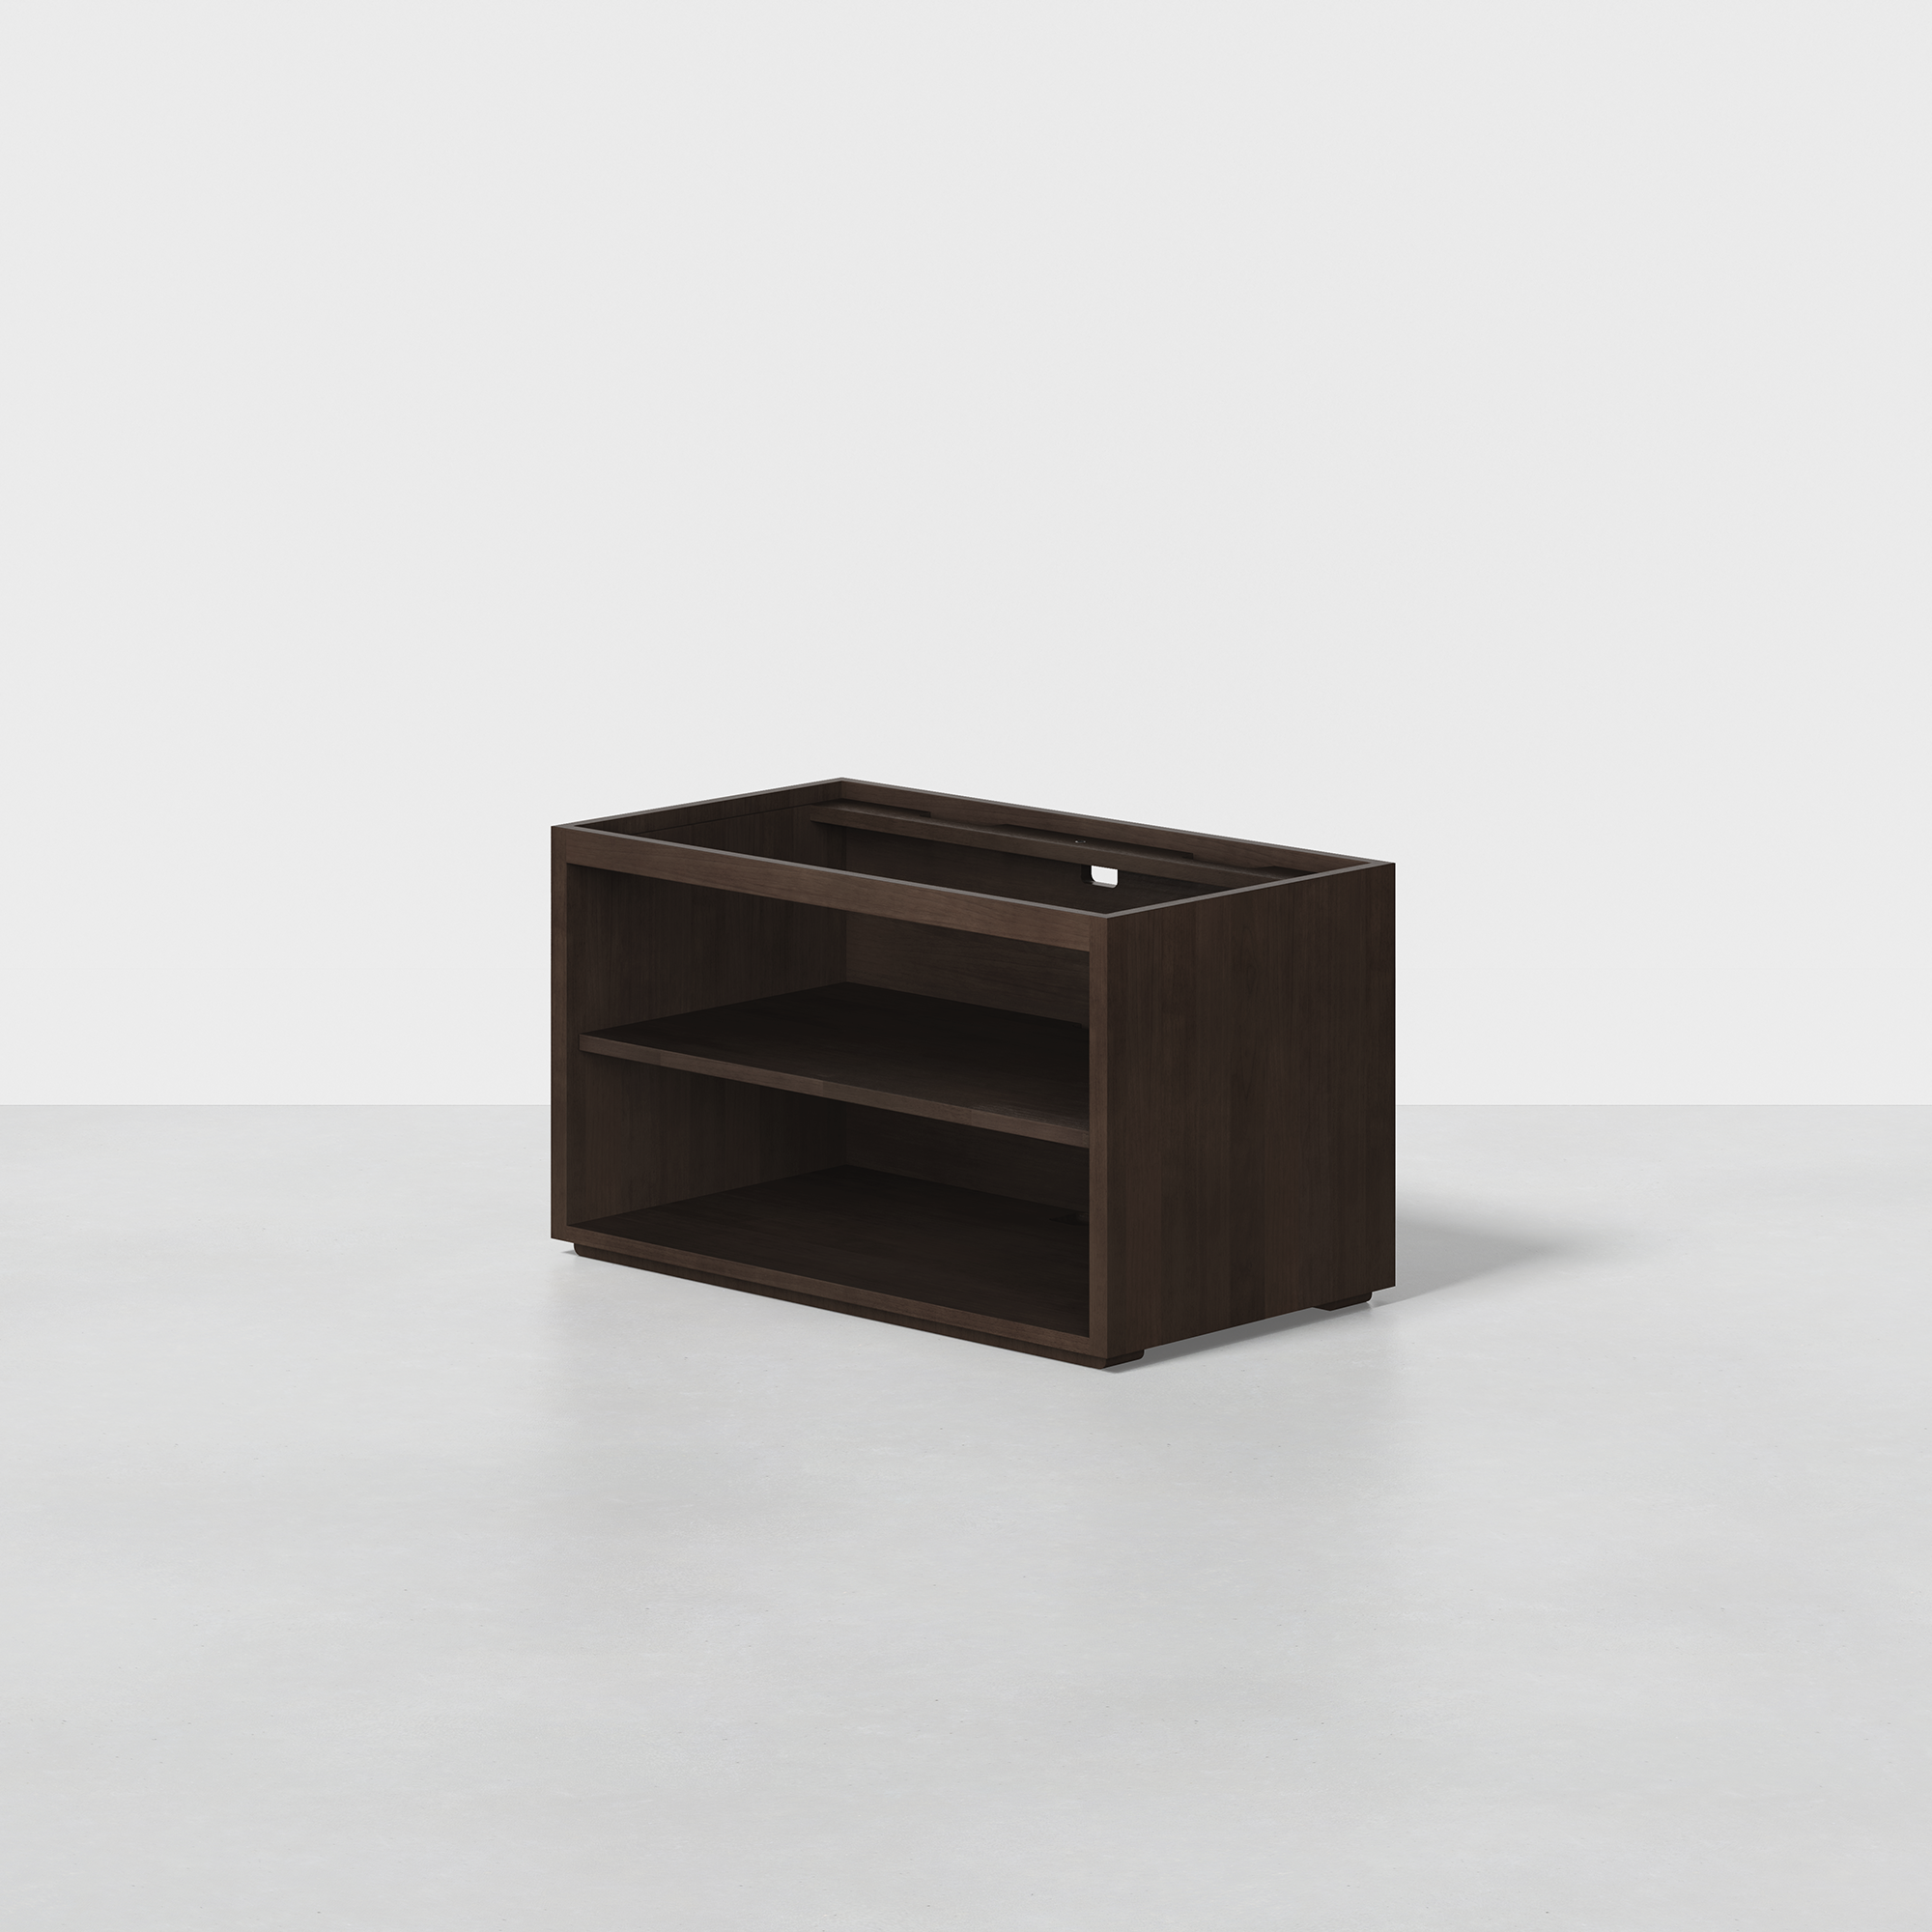 The Cubby (Espresso / Stacking Cubby) - Render - Angled